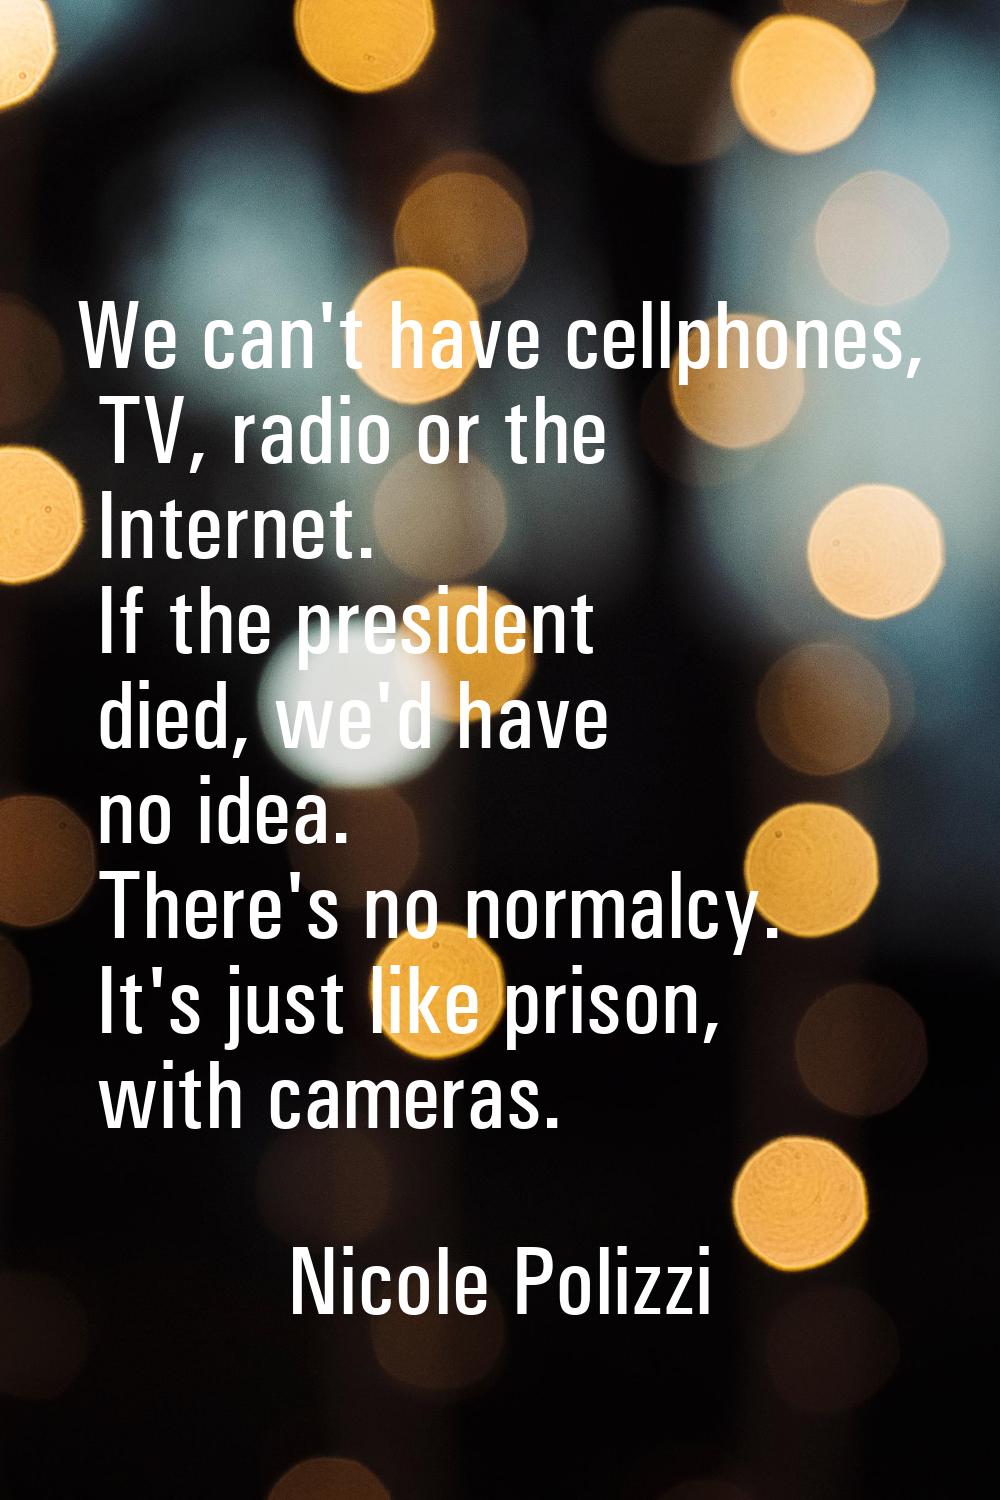 We can't have cellphones, TV, radio or the Internet. If the president died, we'd have no idea. Ther